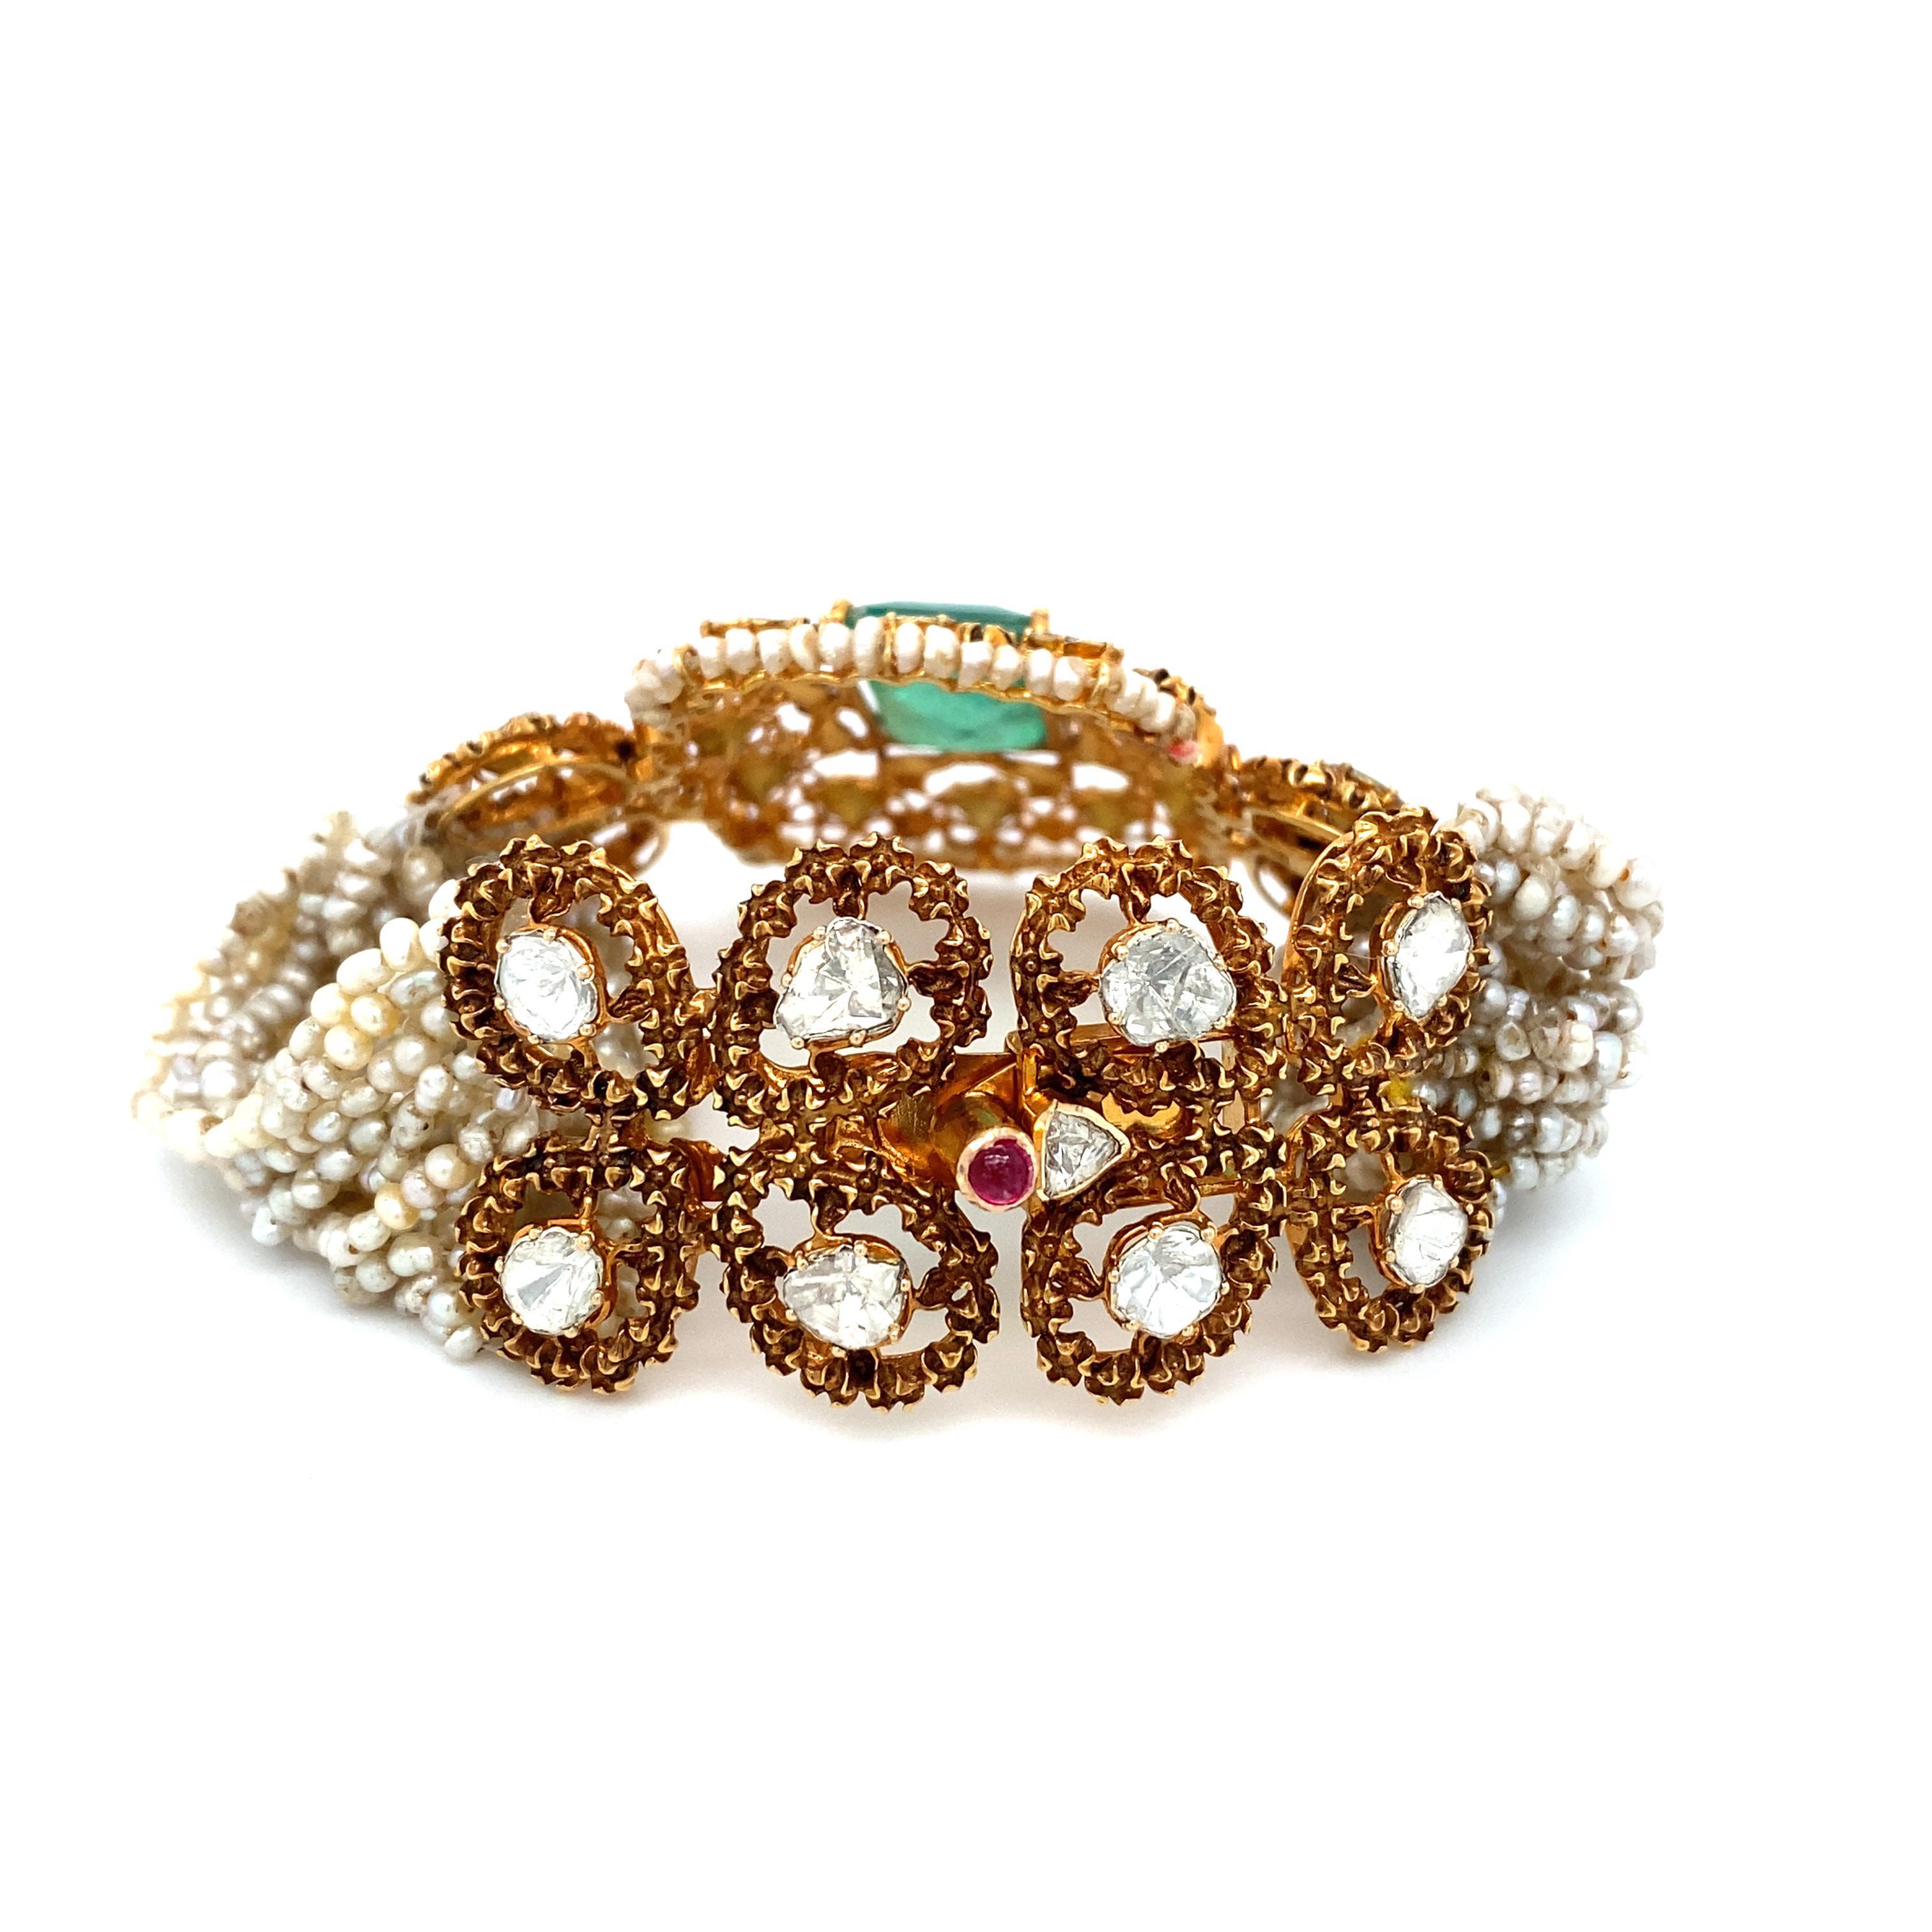 Women's Victorian Revival Seed Pearl and Emerald Bracelet in 14 Karat Gold, circa 1950s  For Sale